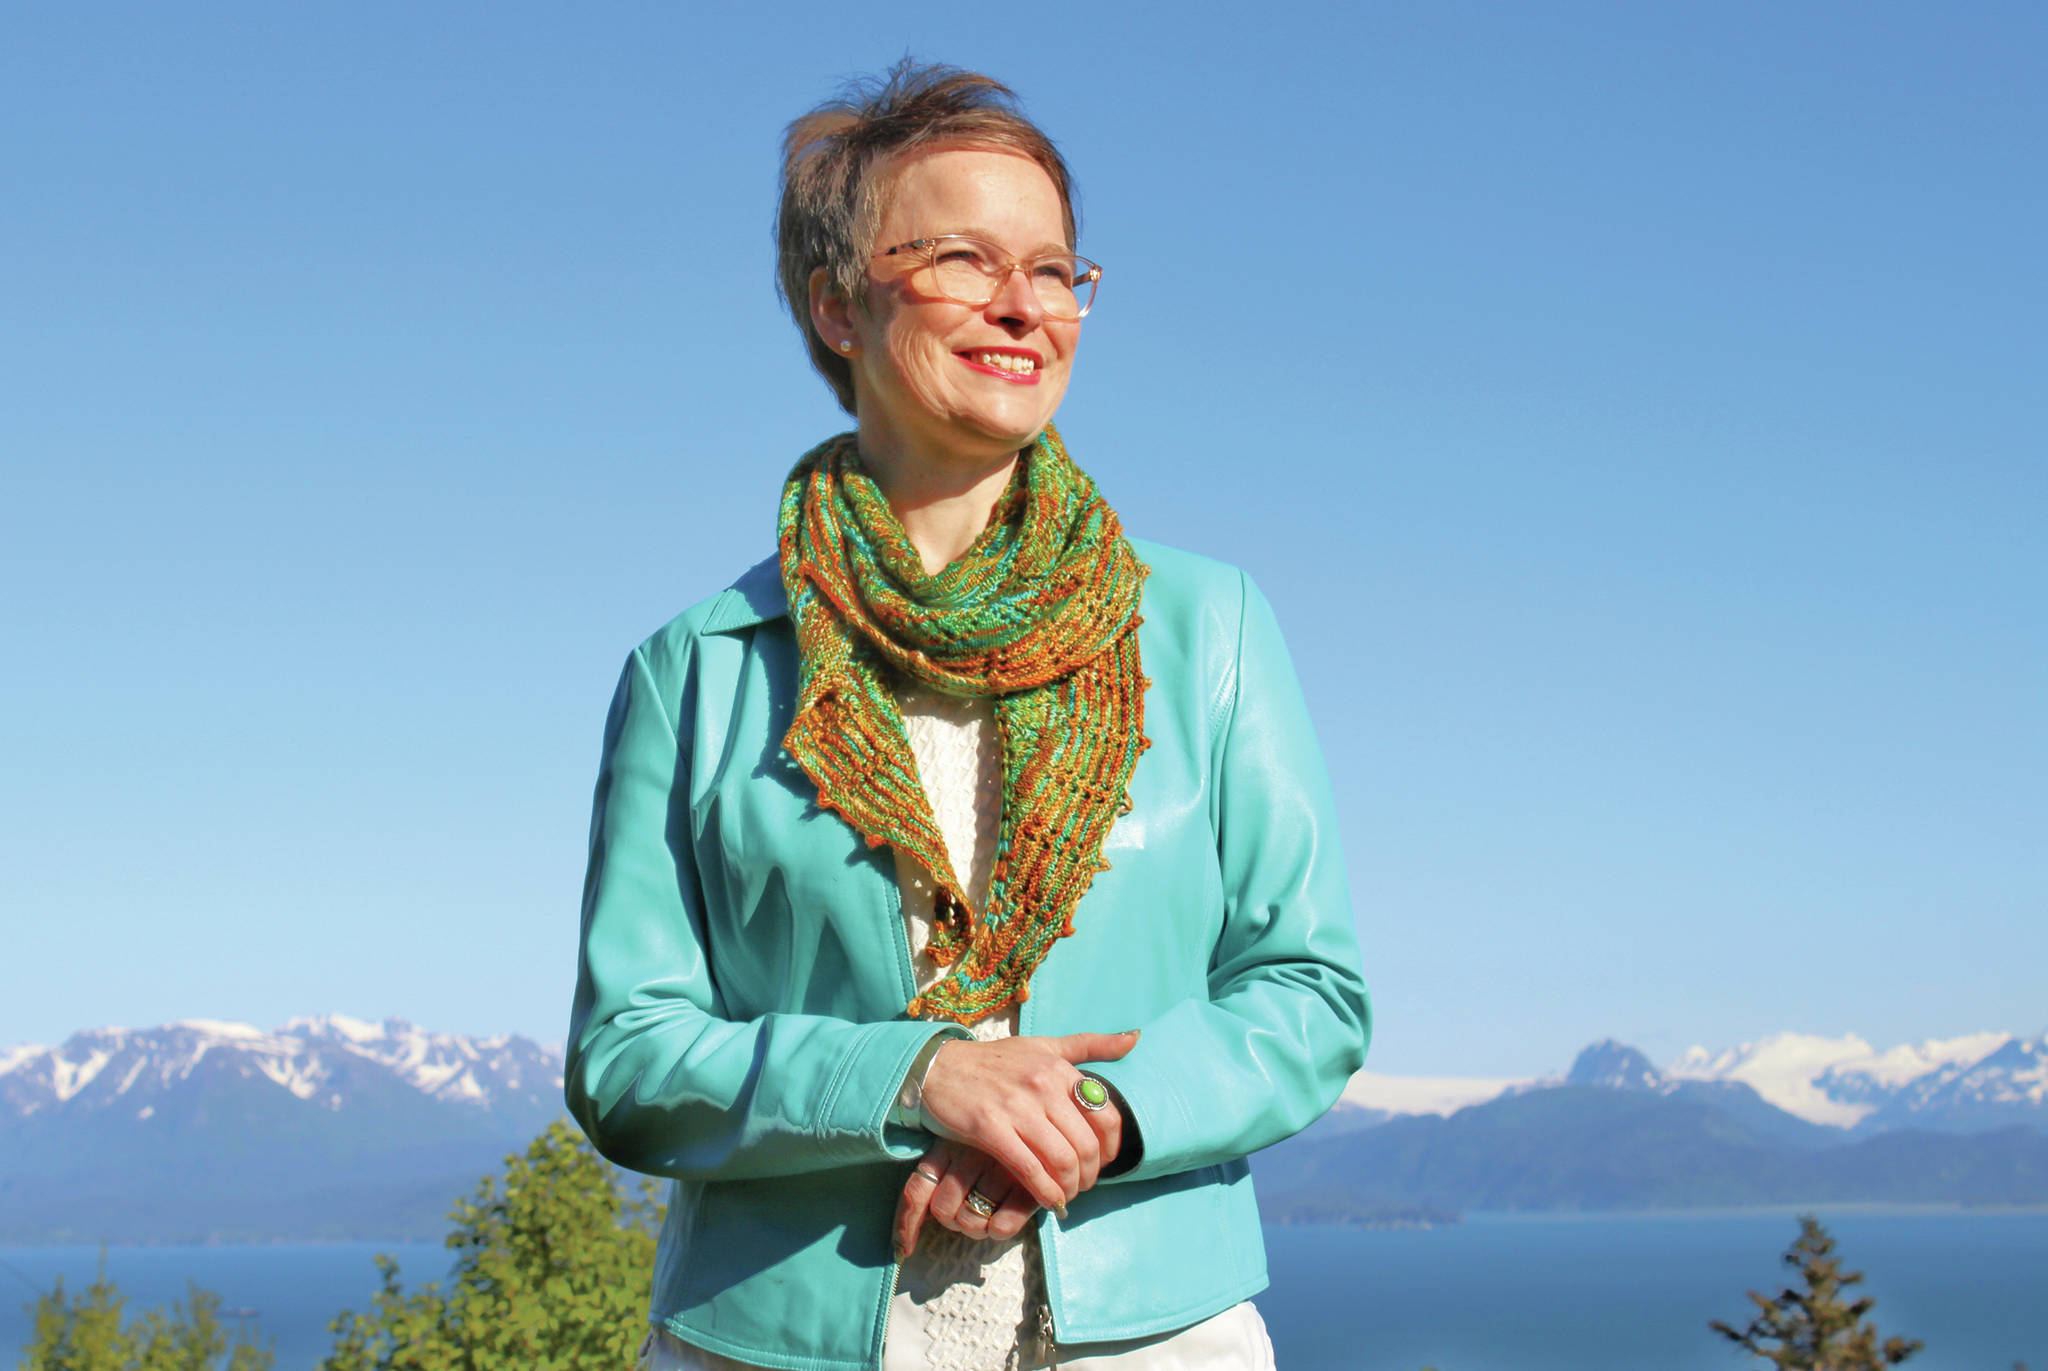 Sarah Vance poses for a photo on June 12, 2020, in Homer, Alaska. (Photo by Hannah Vance)